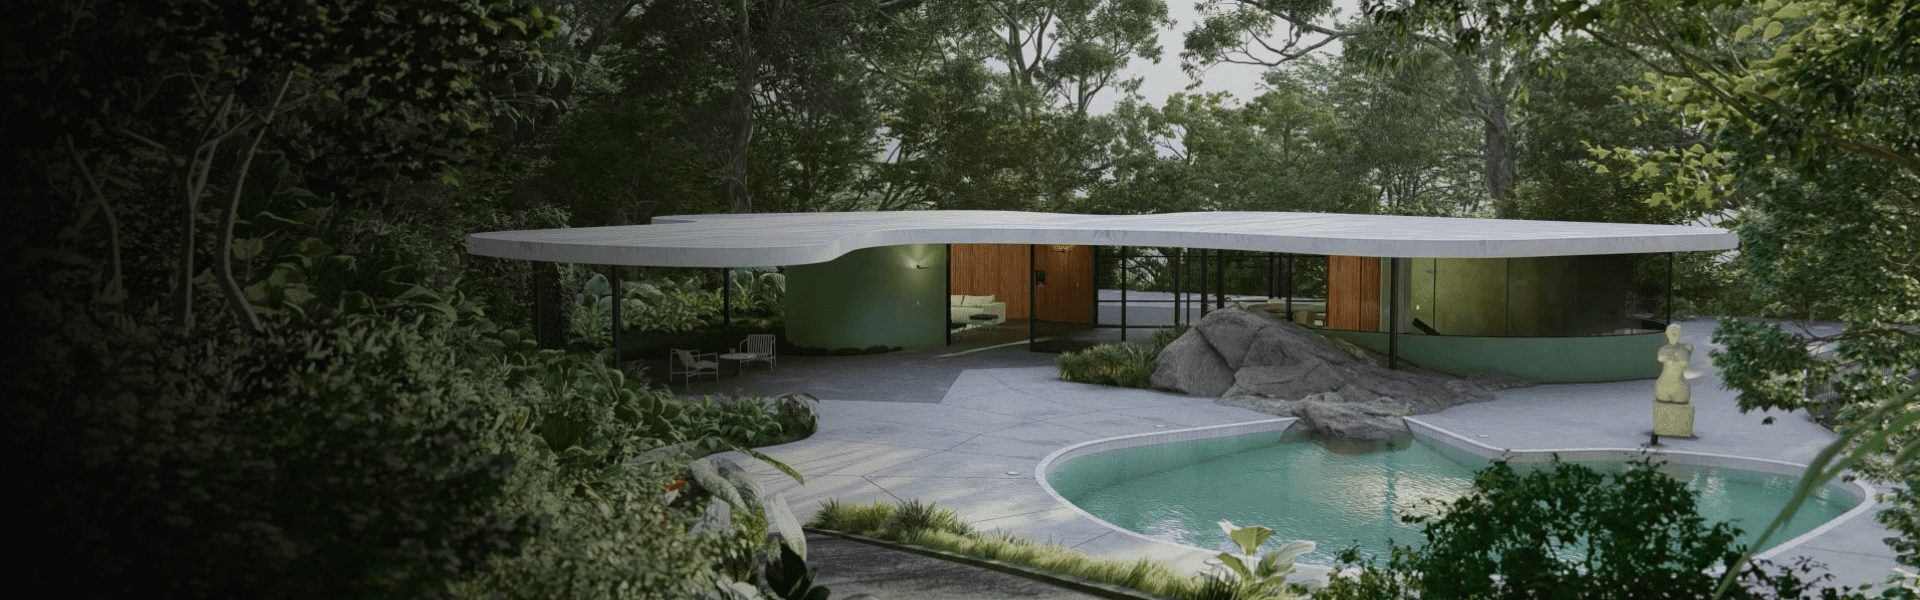 Lumion Banner Showing Render of House with Pool in Forest